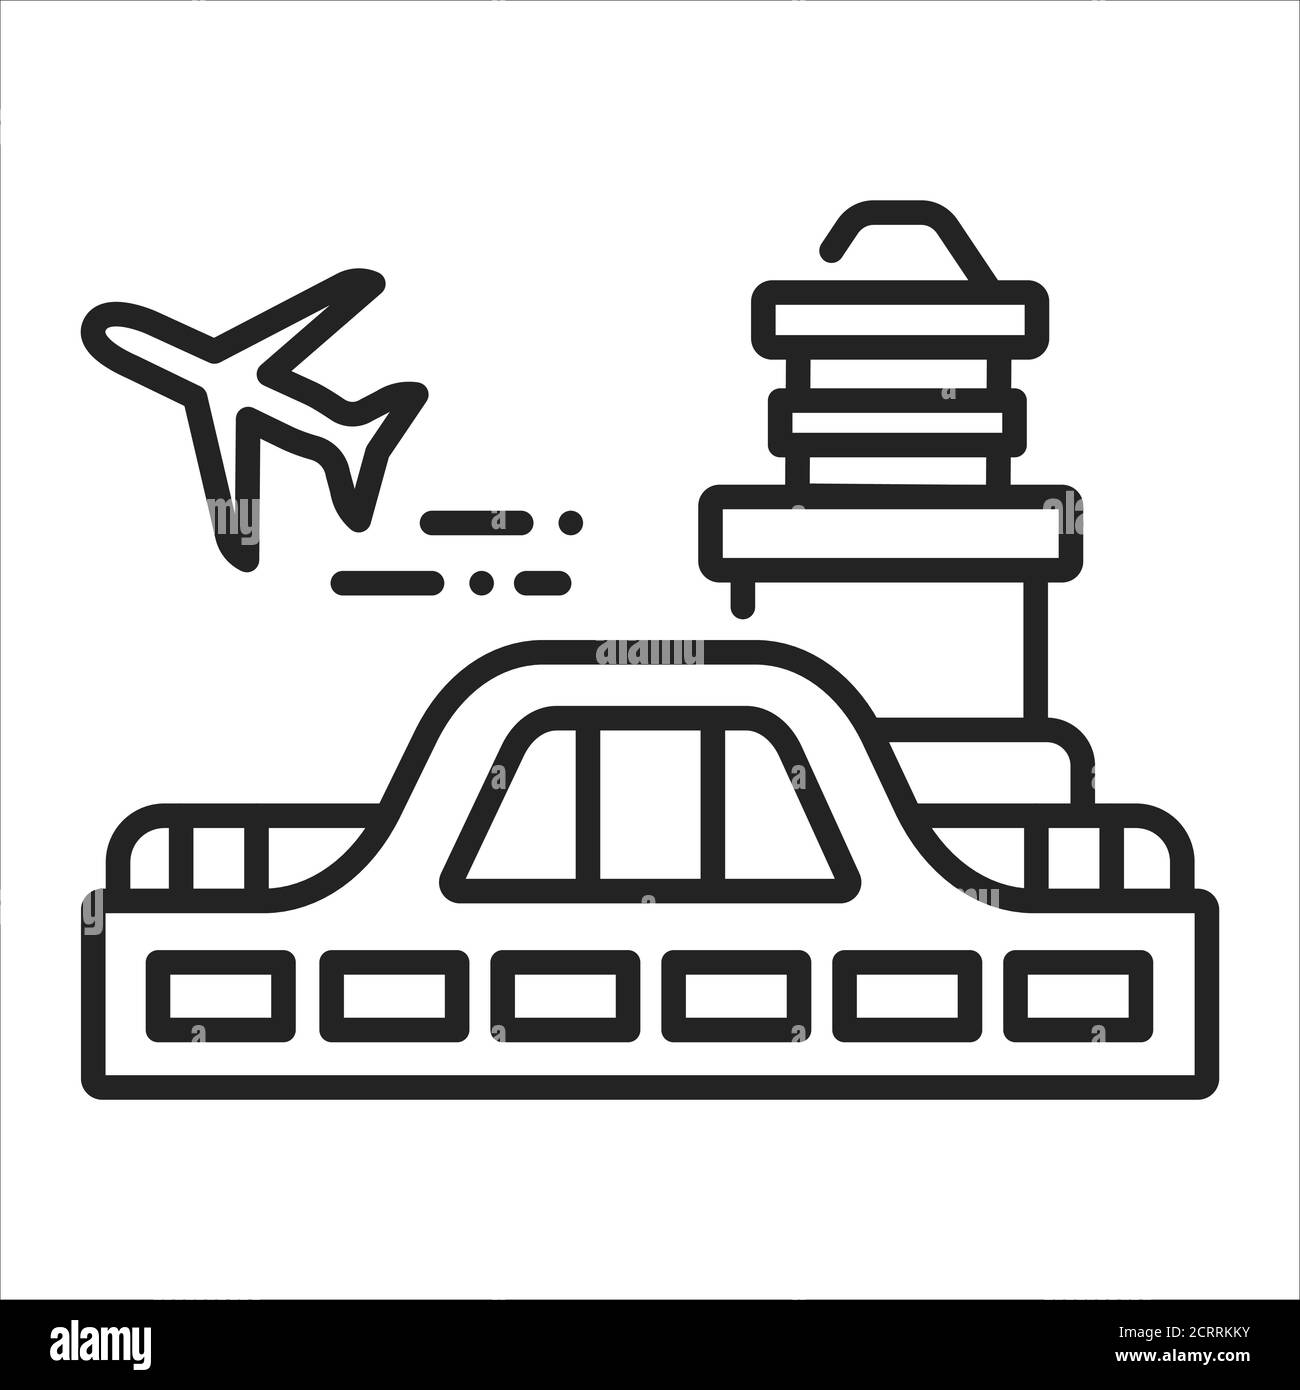 Airport black line icon. Airport with customs and border control facilities. Enabling passengers to travel between countries. Pictogram for web page Stock Vector